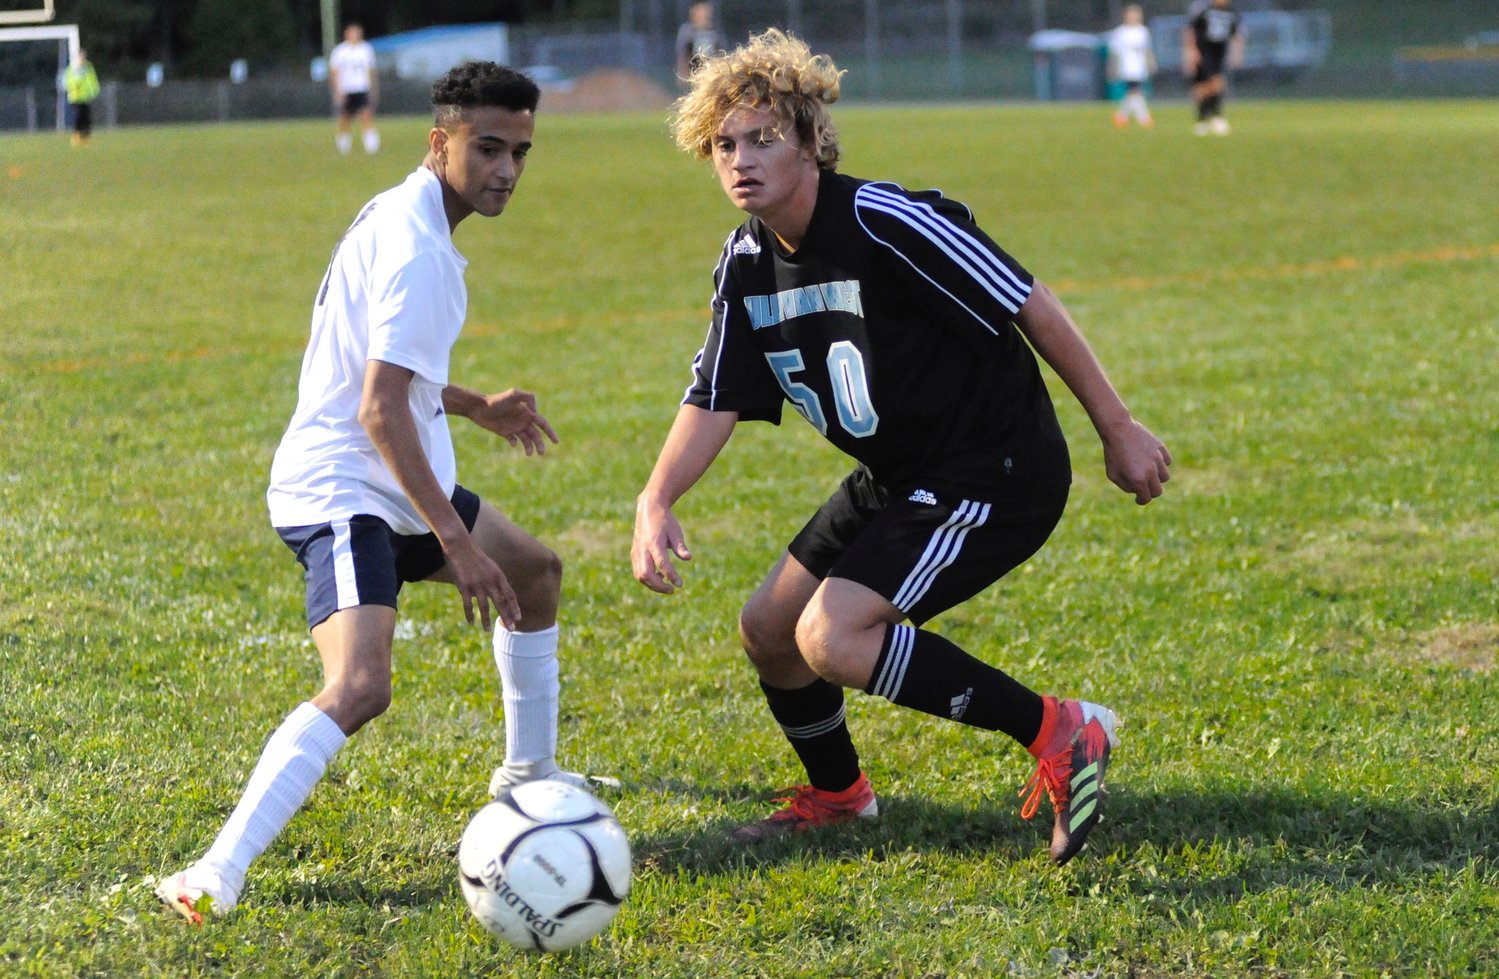 Battle of the booters. Burke’s W. Garcia and Sullivan West’s Charlie Kutschera focus on who’s going to win the ball.